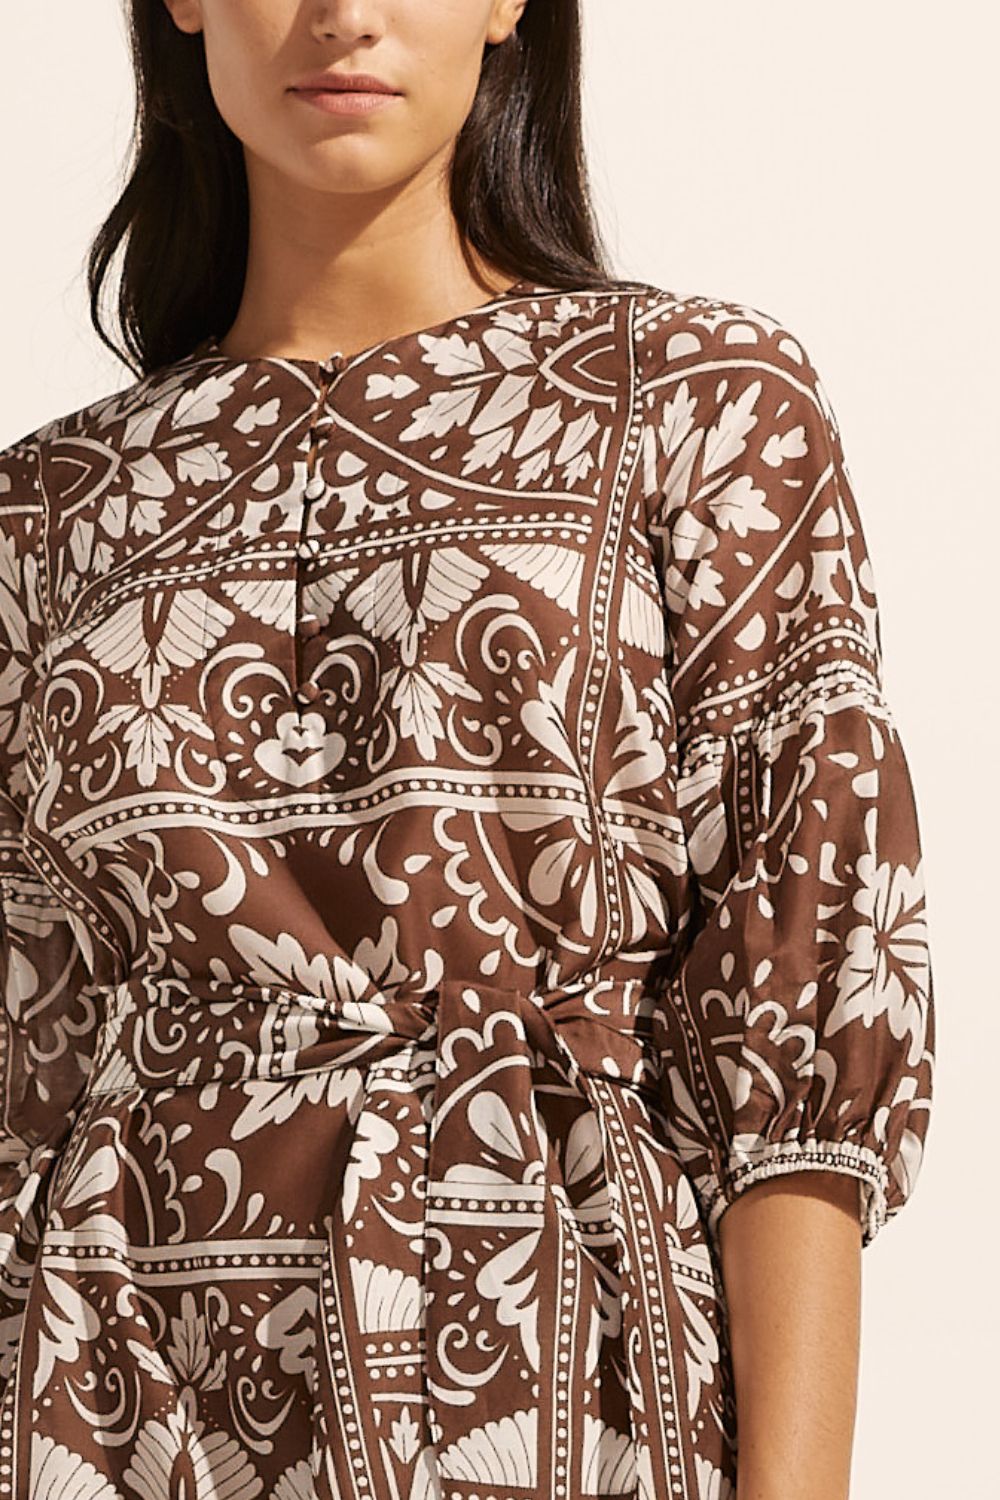 brown and white print, fabric self tie belt, mid length sleeve, rounded neckline, side splits, close up view